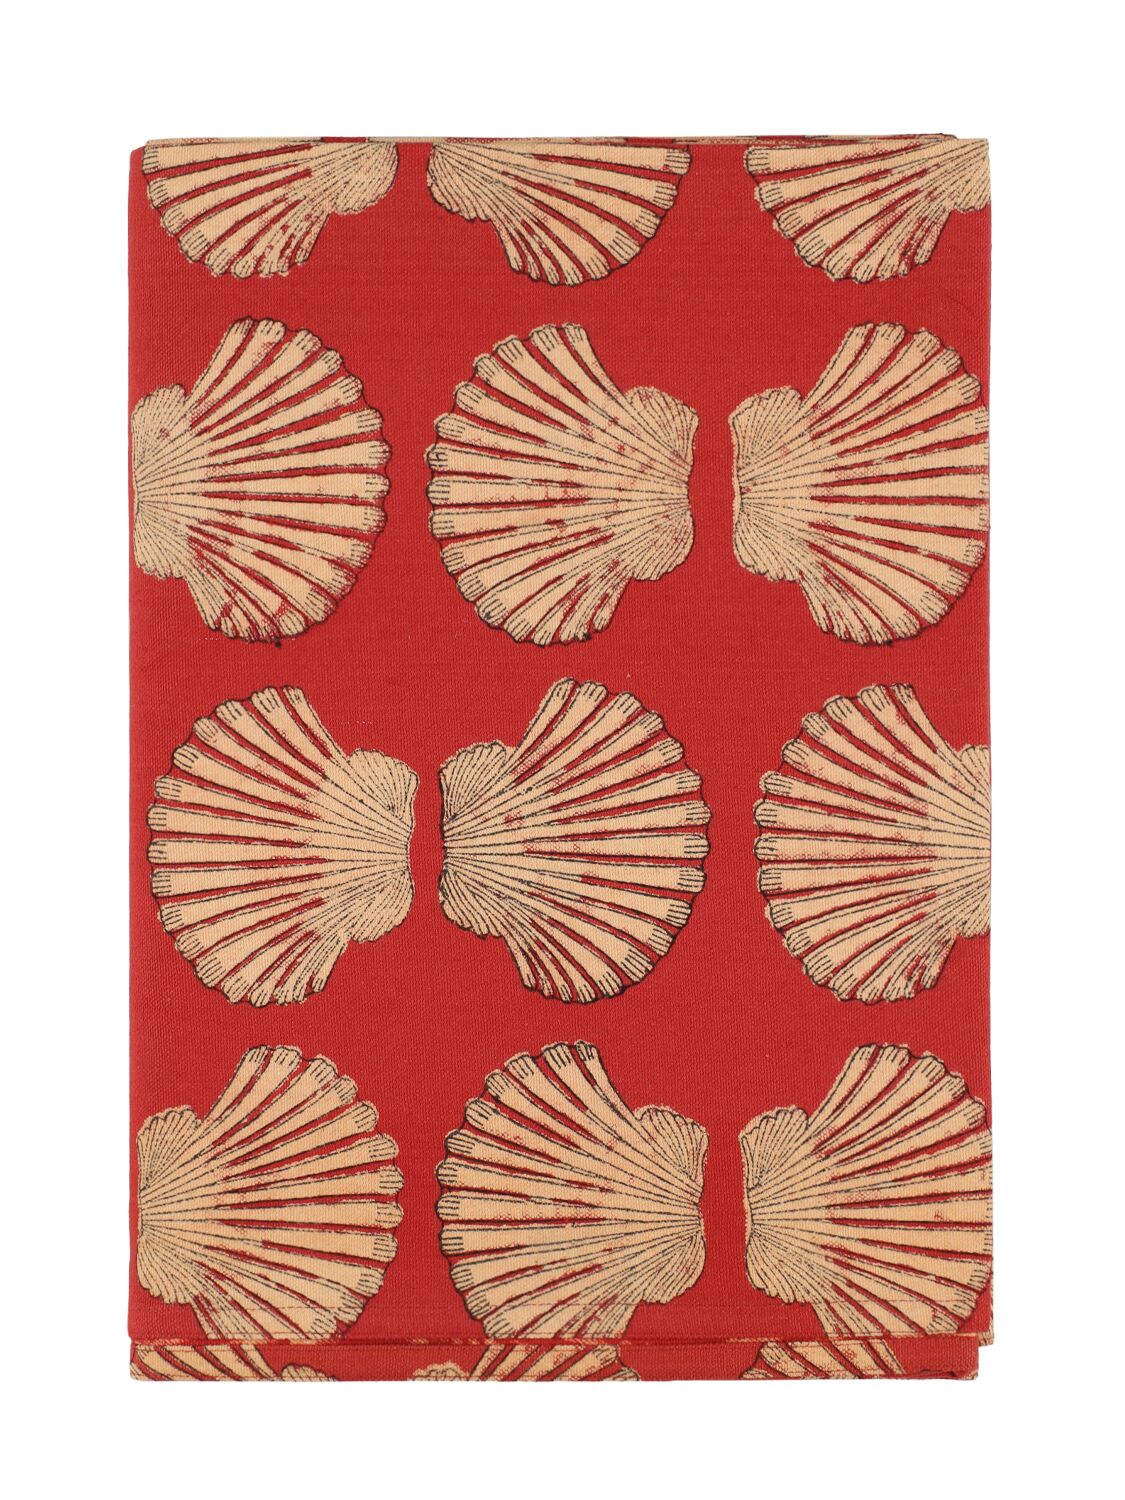 Les Ottomans Hand-printed Cotton Tablecloth In Red